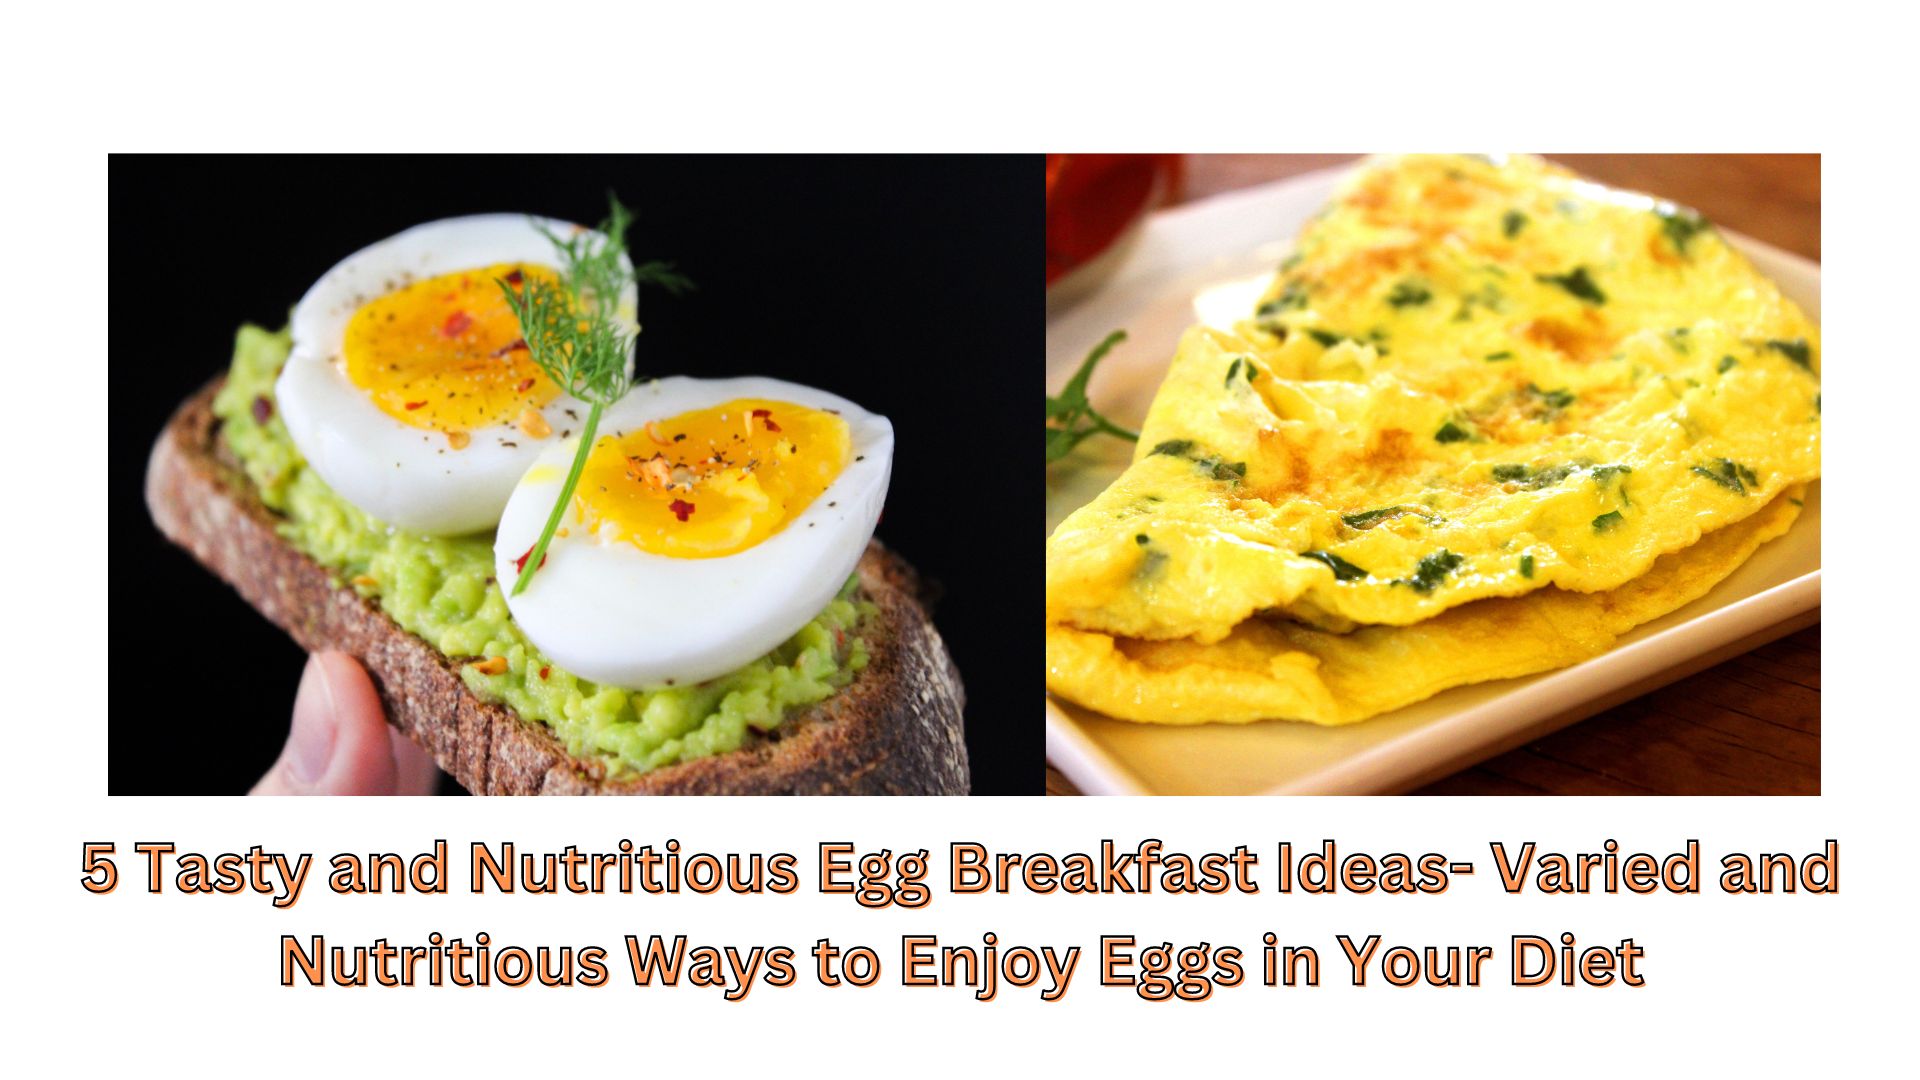 5 Tasty and Nutritious Egg Breakfast Ideas- Varied and Nutritious Ways to Enjoy Eggs in Your Diet